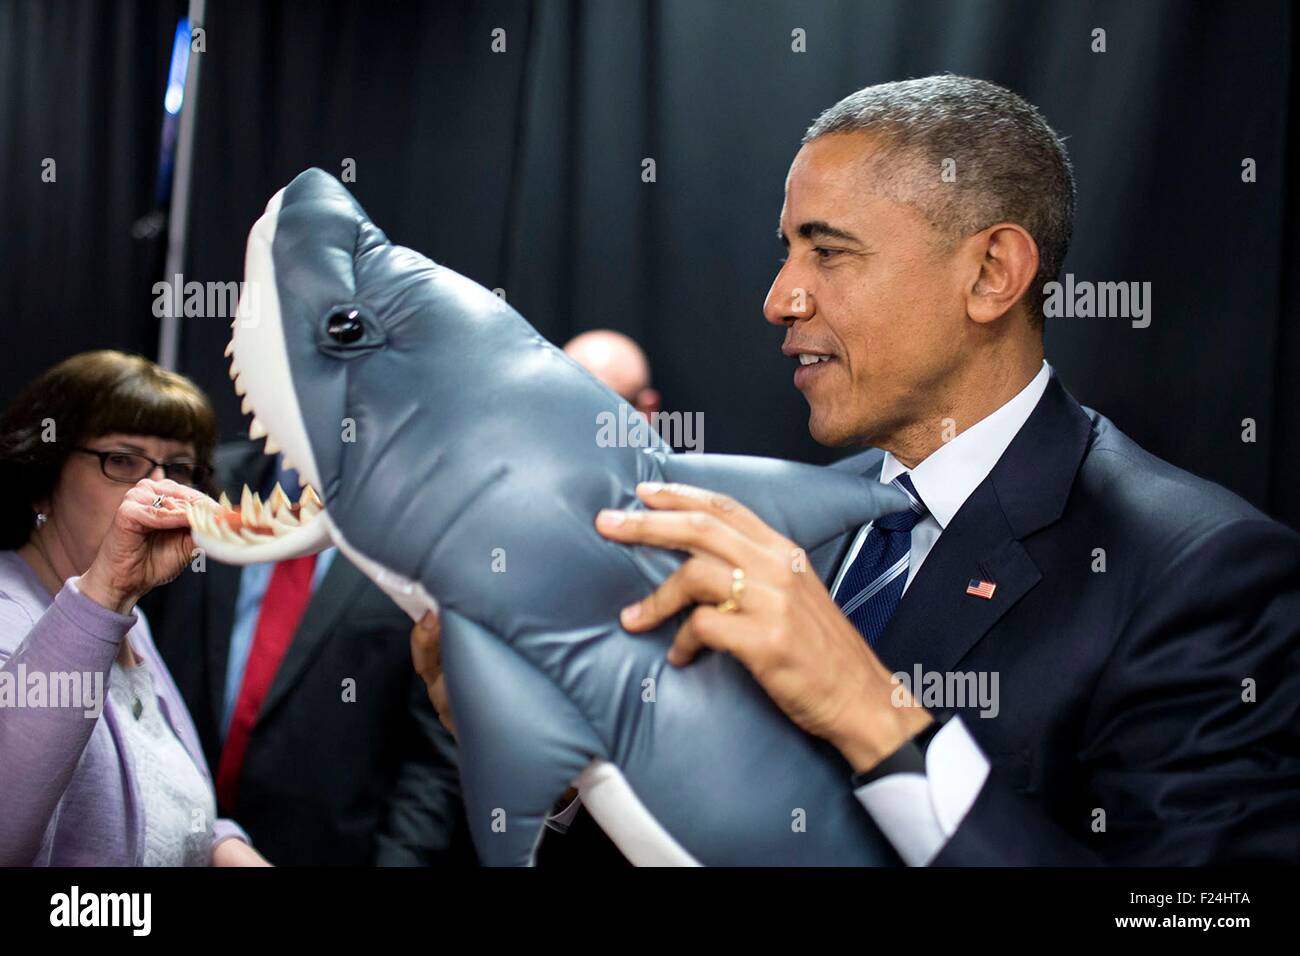 U.S. President Barack Obama holds an inflatable shark as he waits backstage prior to a town hall meeting with online communities BlogHer and SheKnows regarding working families issues at ImaginOn April 15, 2015 in Charlotte, N.C. Stock Photo